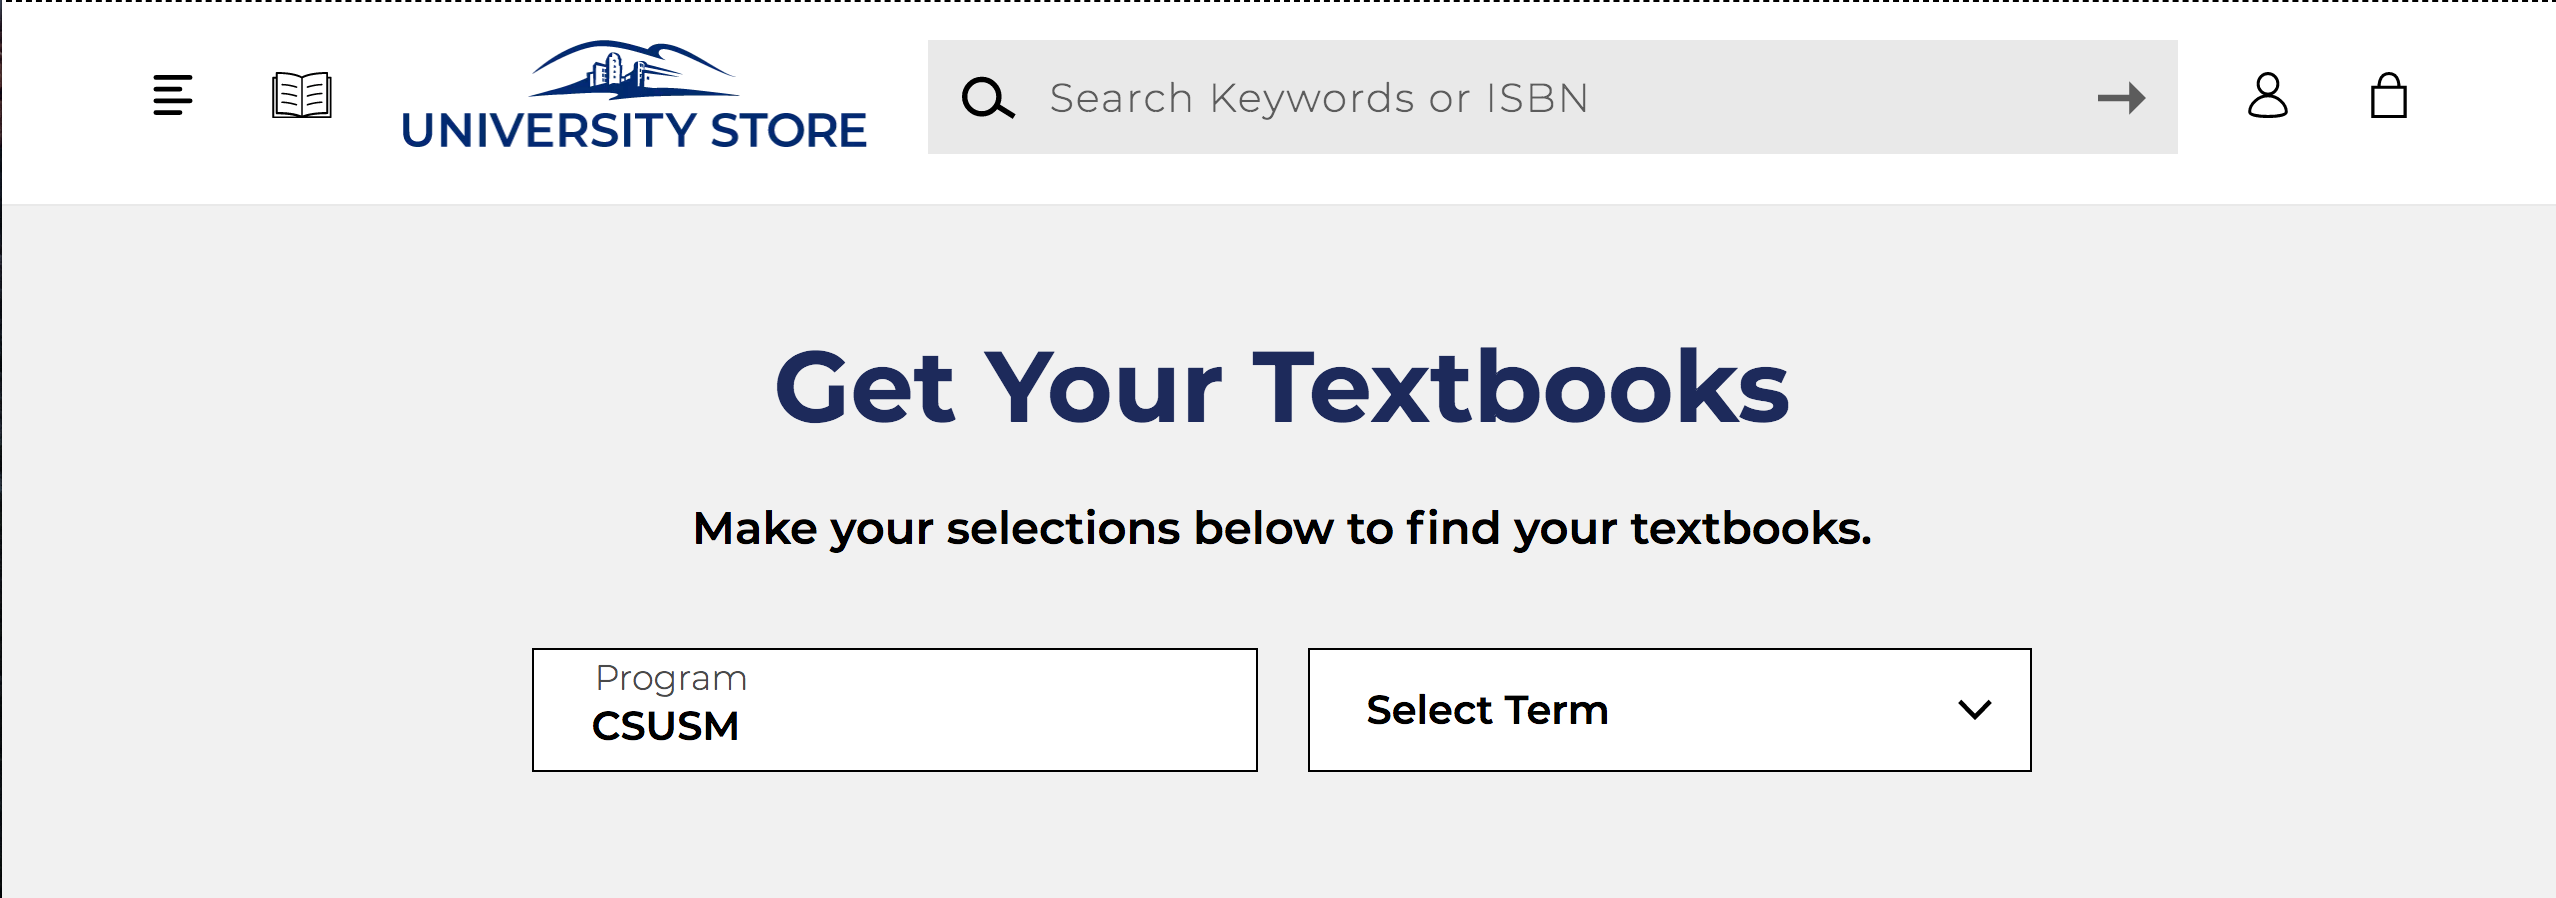 Textbooks and Course Materials Page